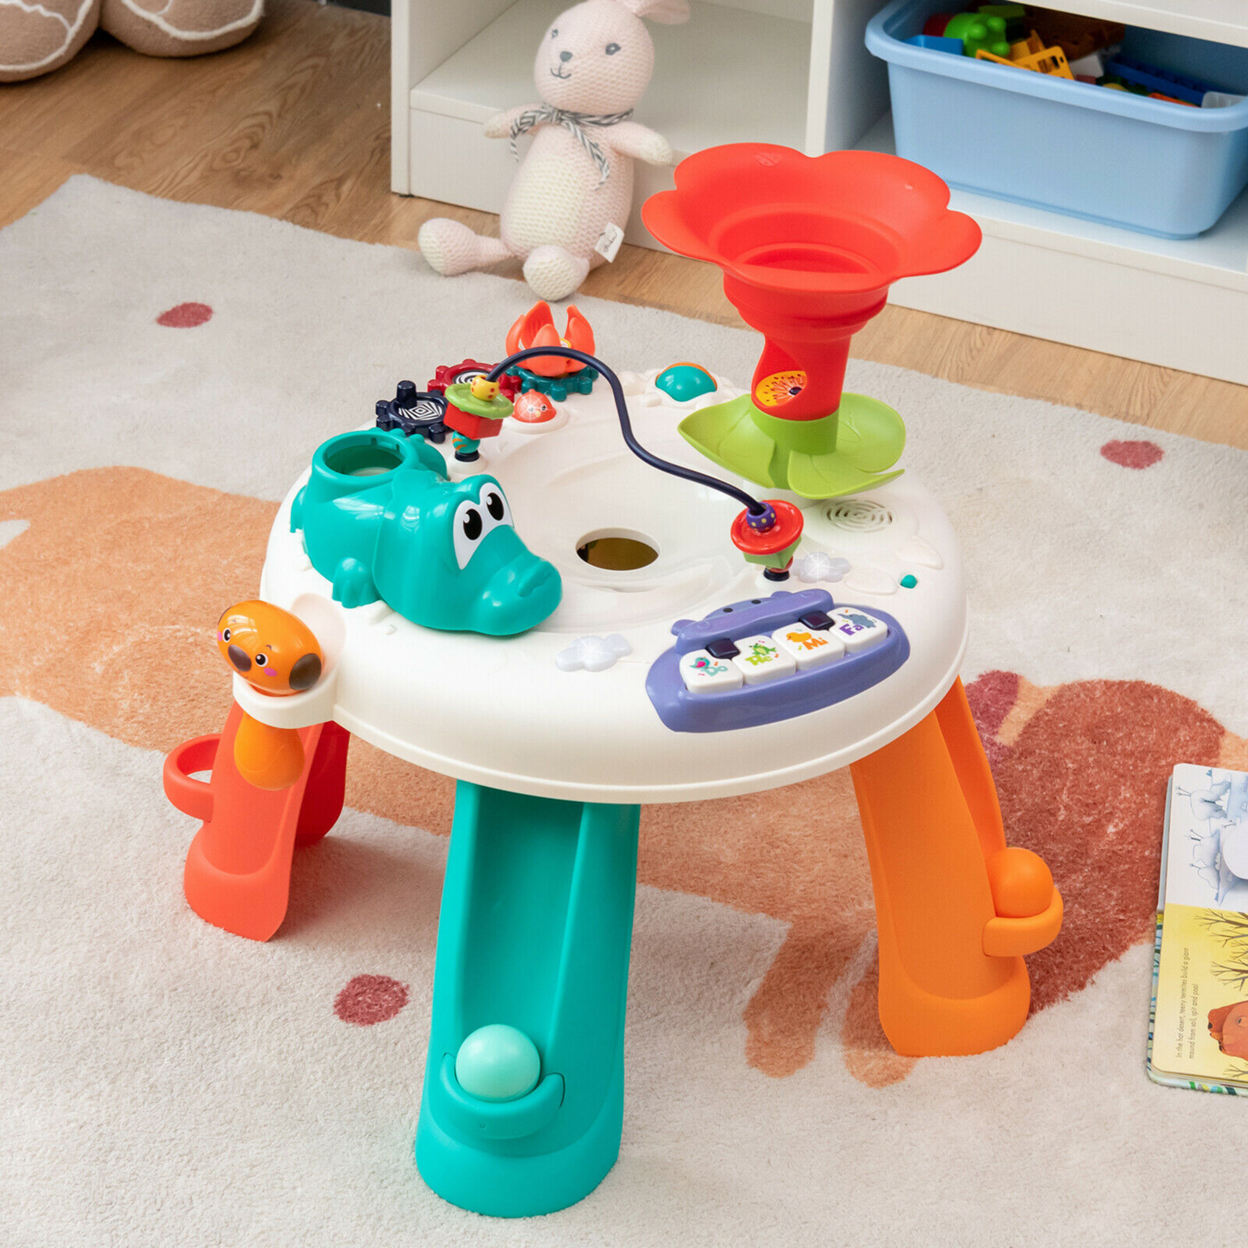 Baby Toys Age 12+ Months Music Activity Table Toddler Learn Table W/ Light & Songs